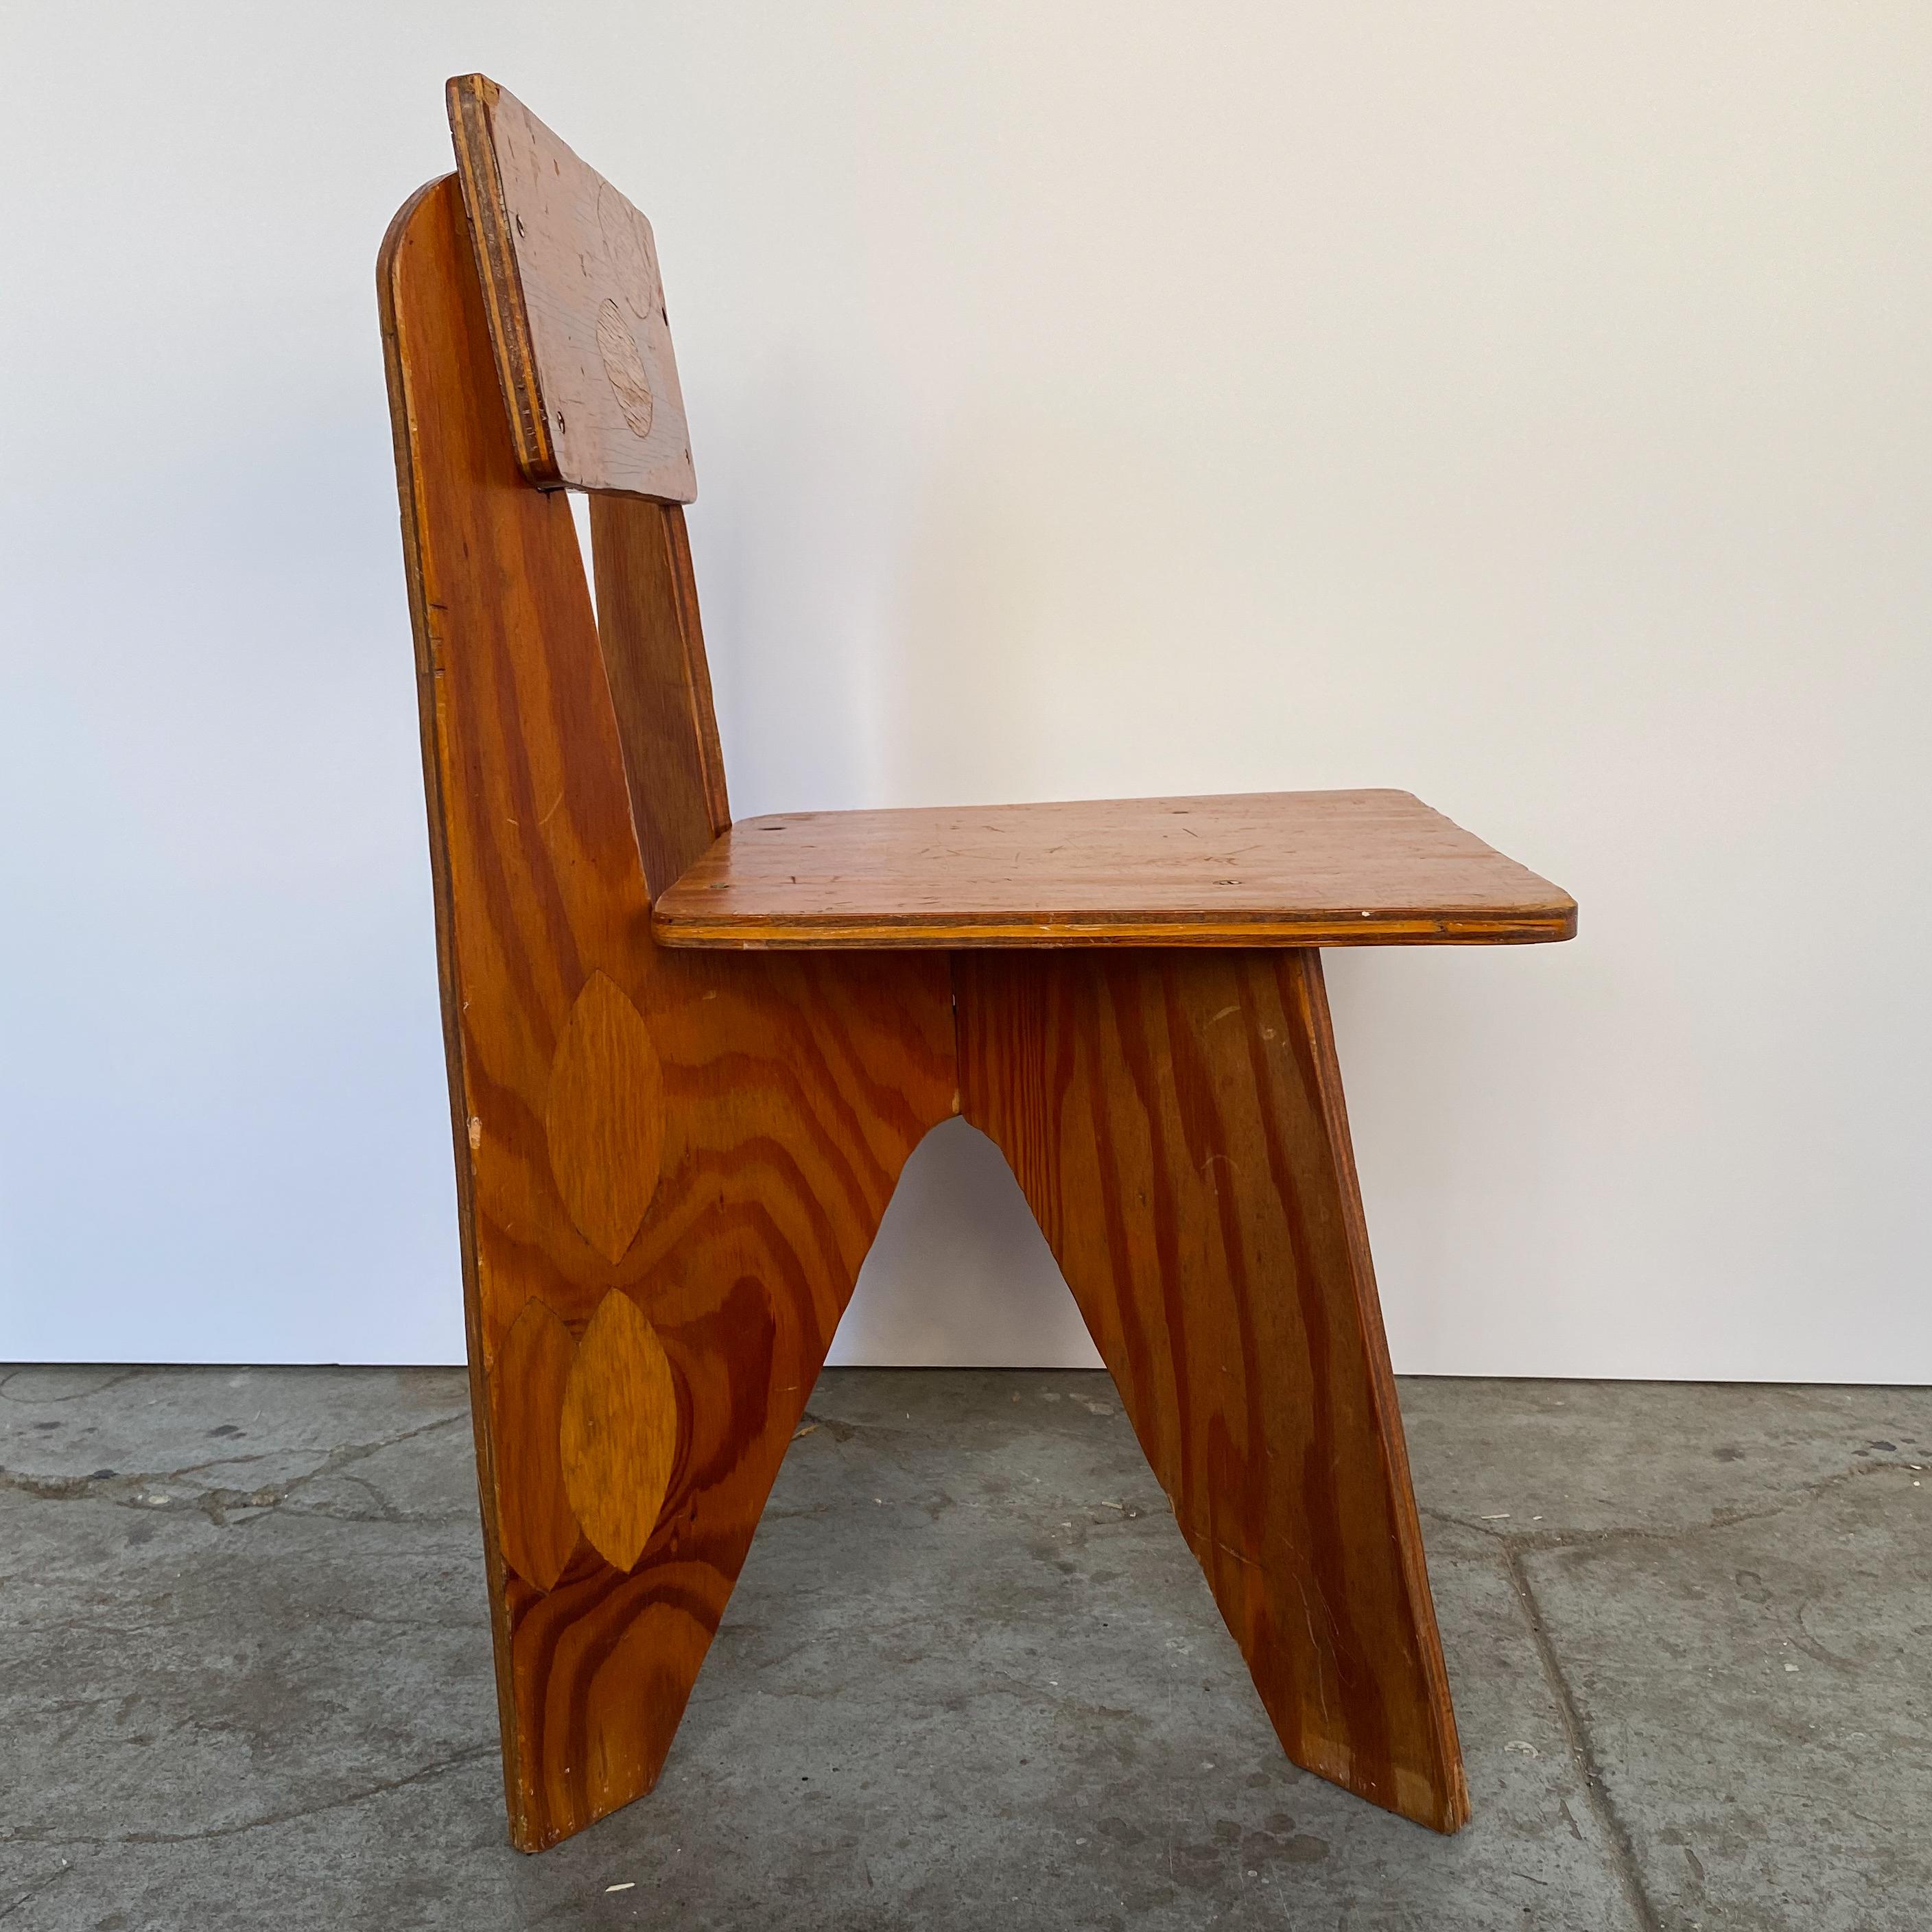 Mid-Century Modern Mario Dal Fabbro Child's Chair in Plywood For Sale